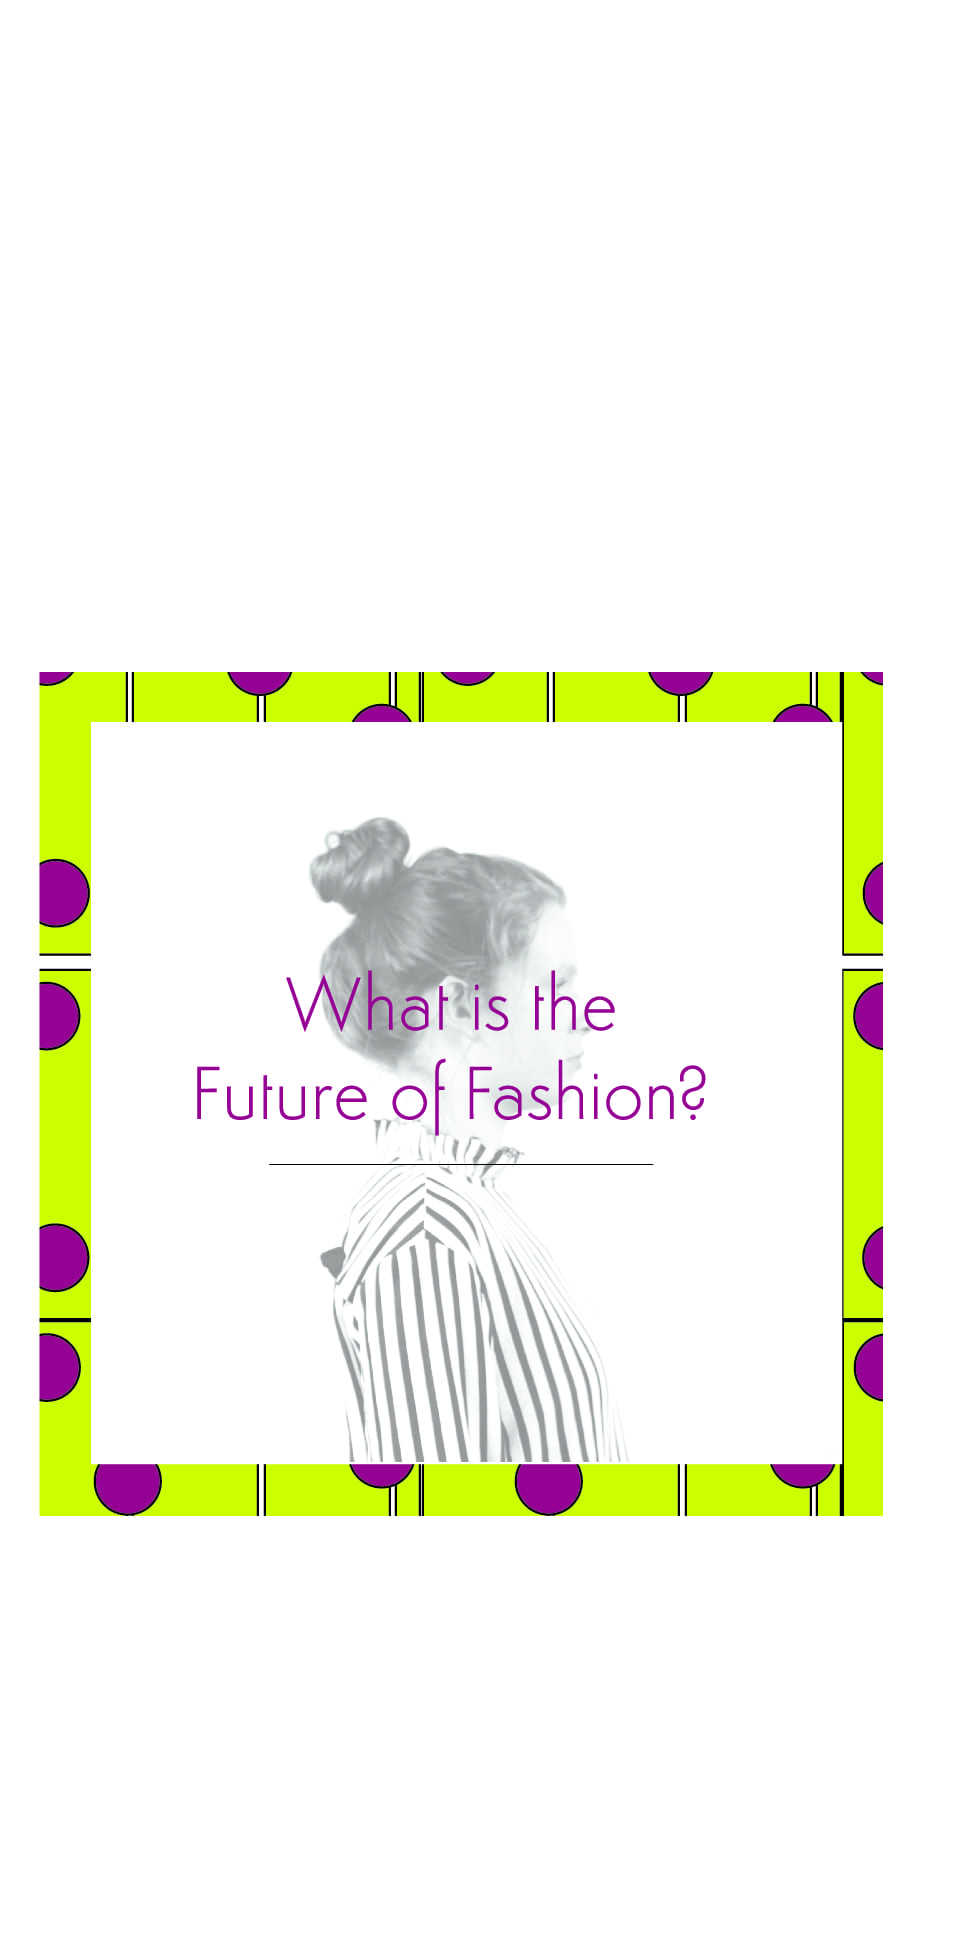 Where are we in the fashion industry?>